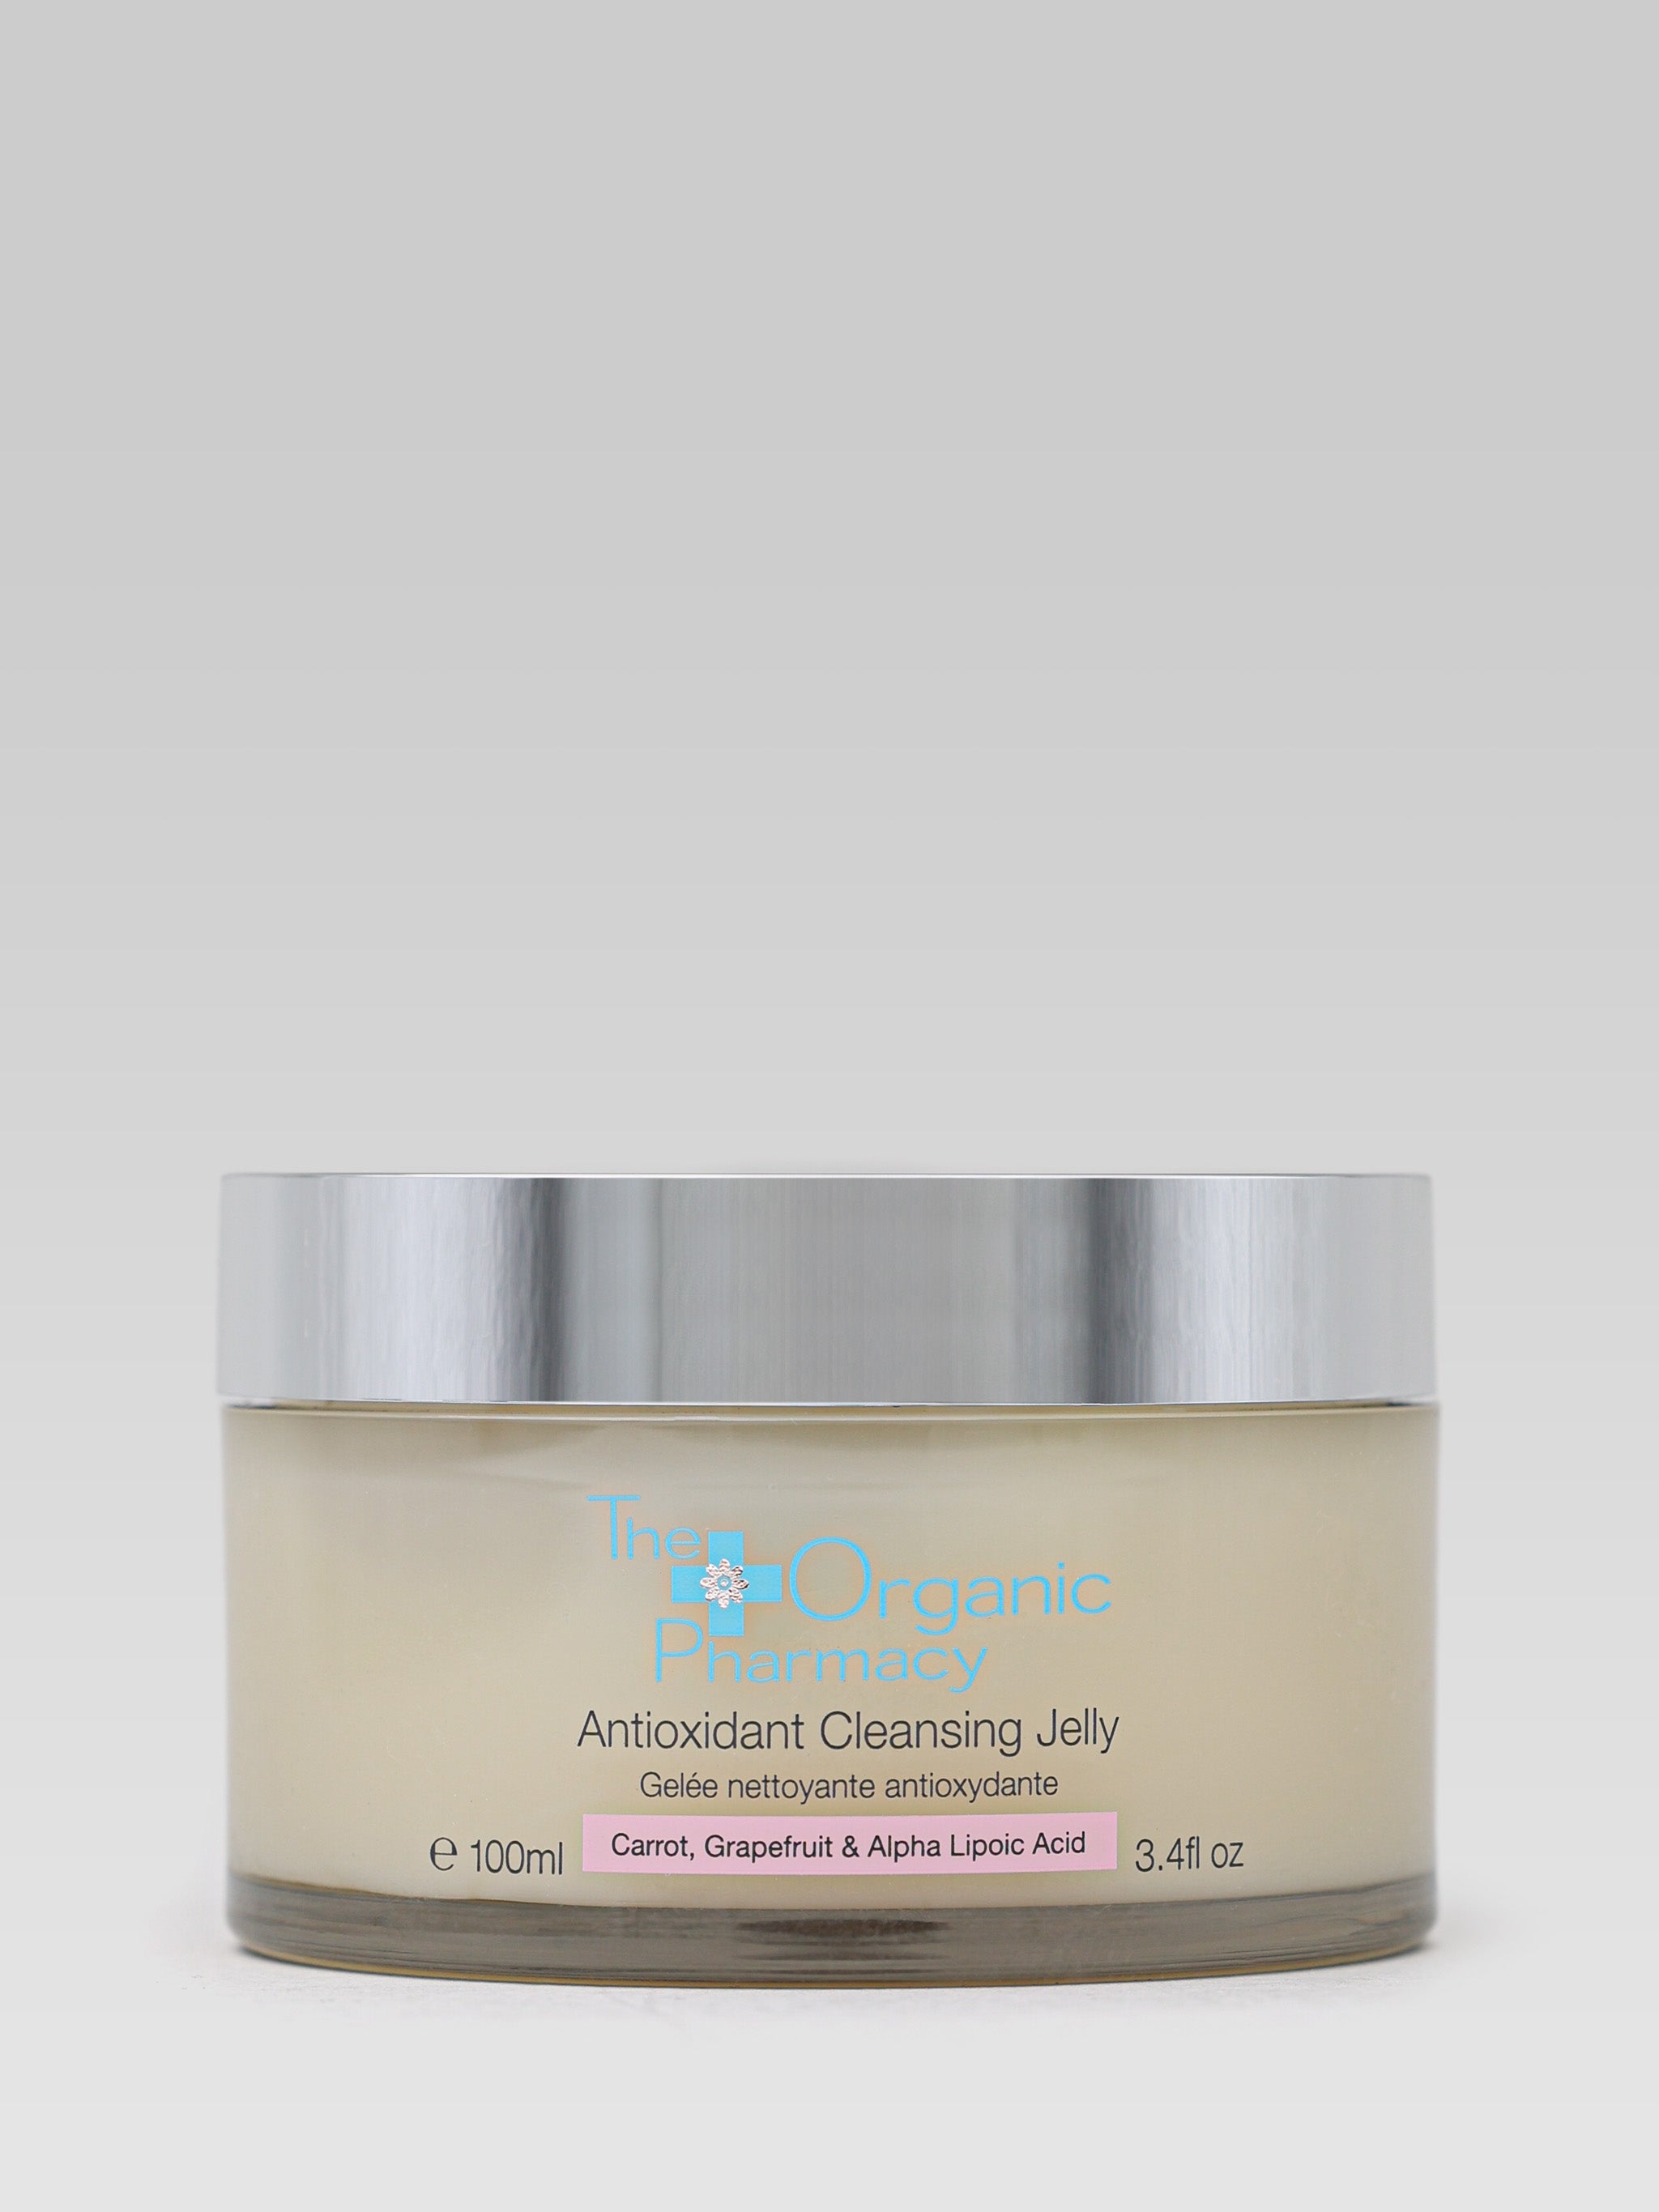 THE ORGANIC PHARMACY Antioxidant Cleansing Jelly